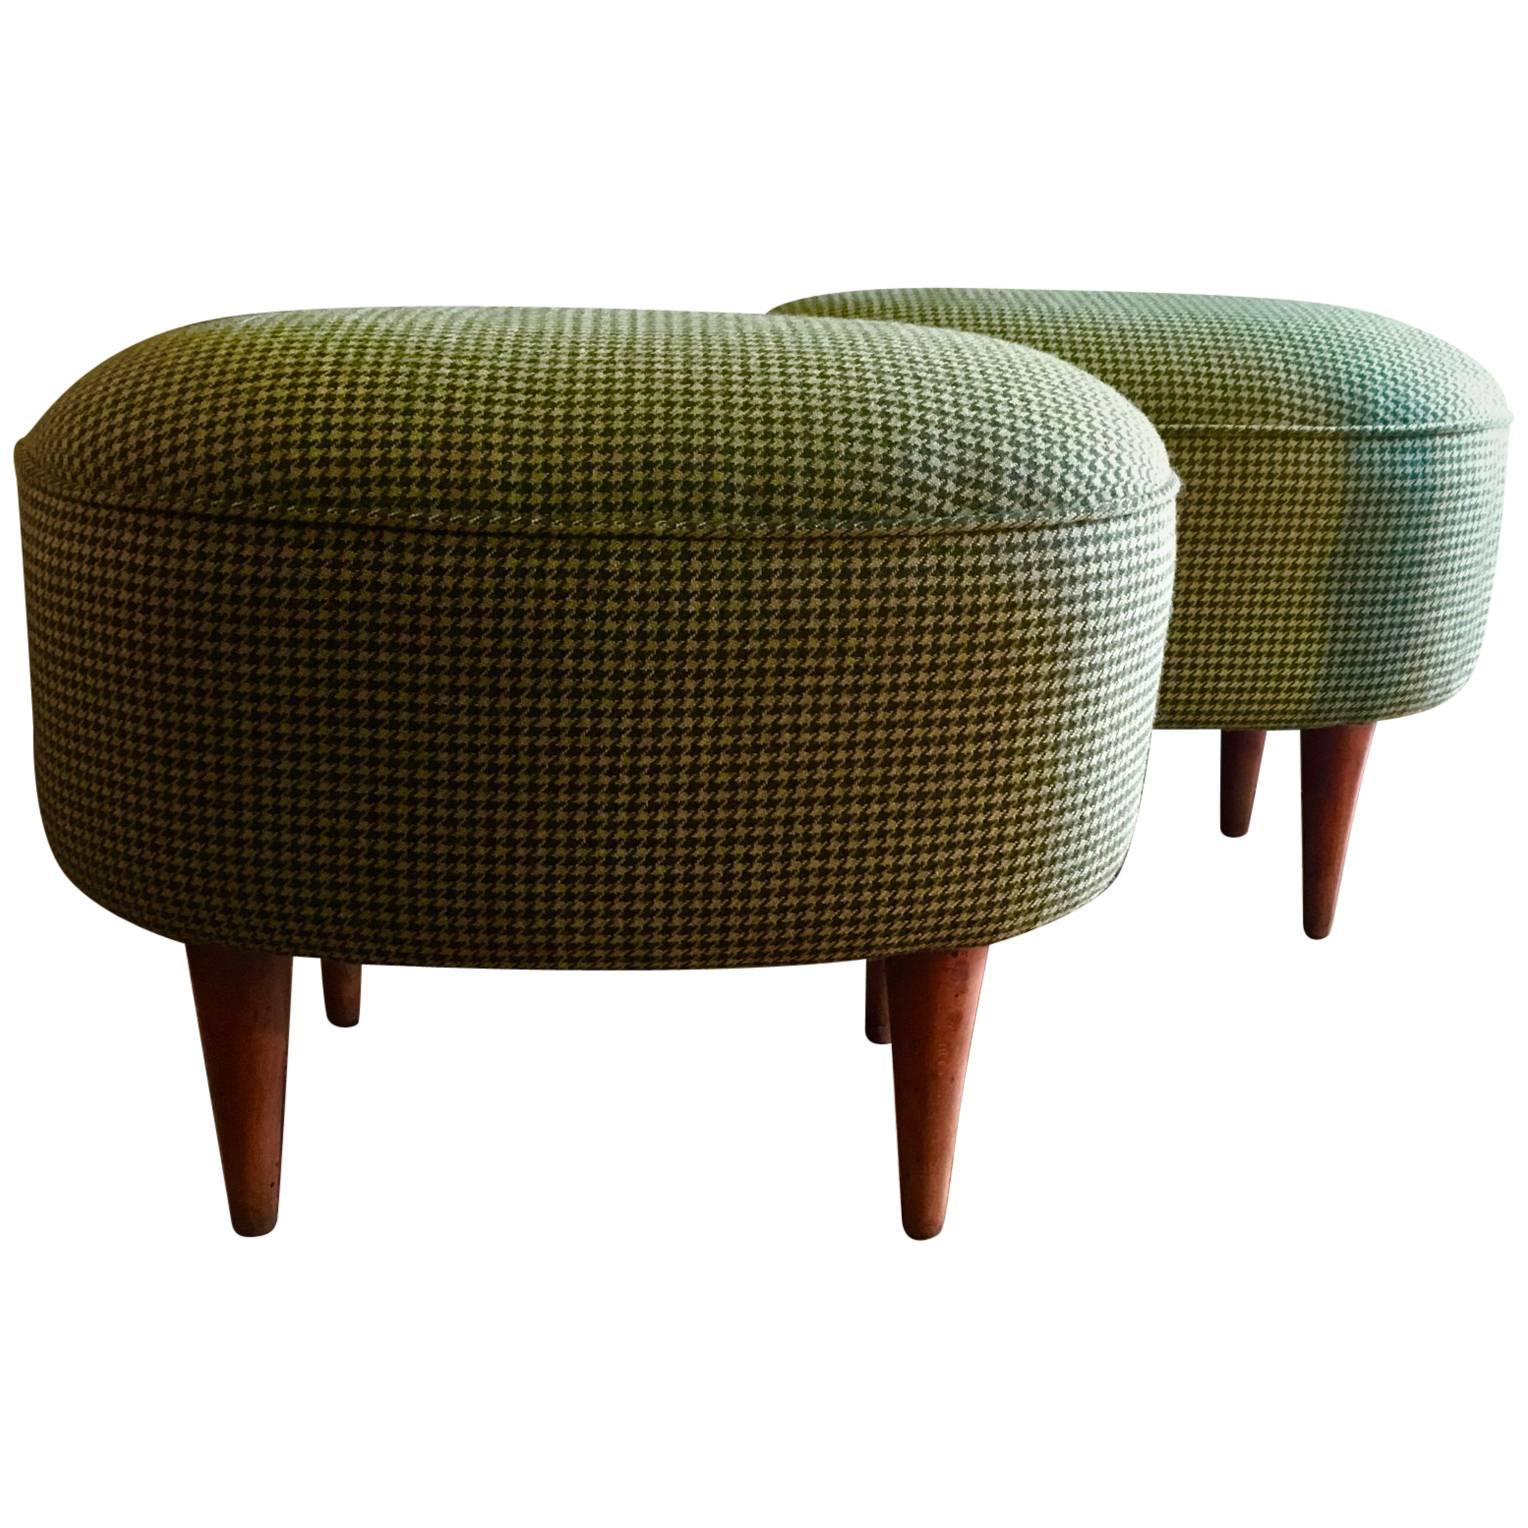 1950s Italian Footstools in a Woollen Green Houndstooth Upholstery, Pair